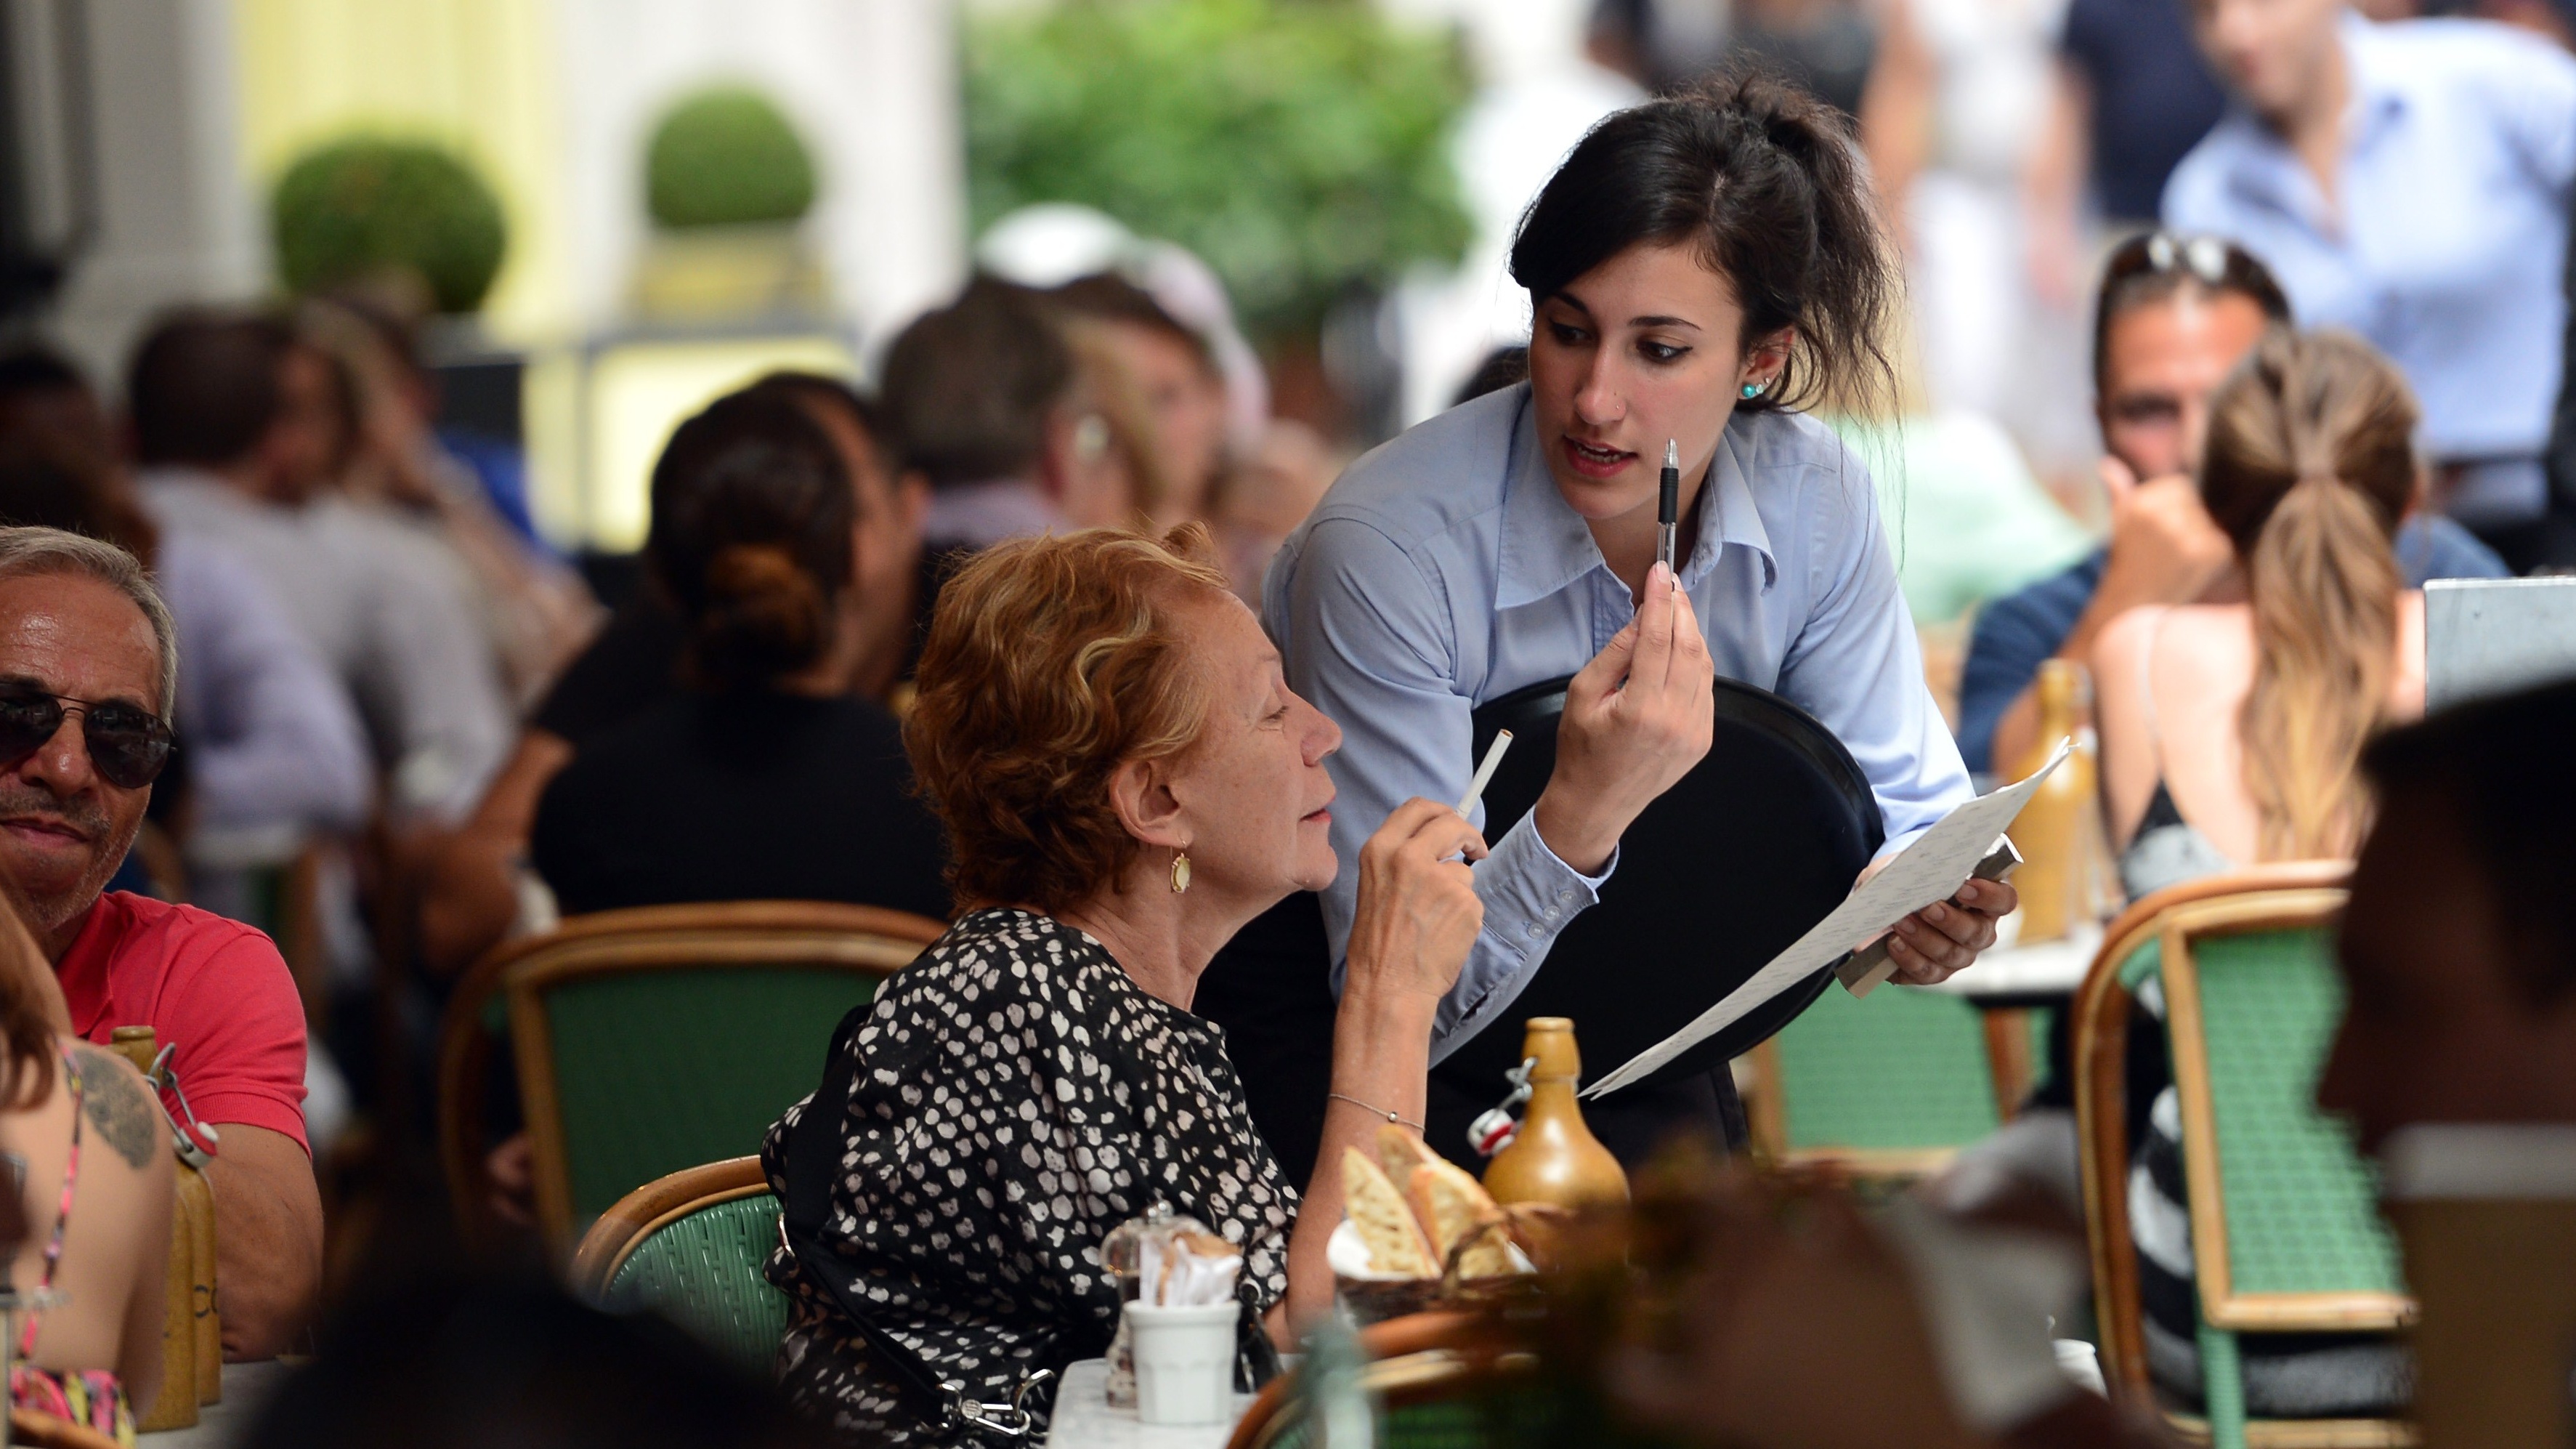 Waitress takes an order in central London restaurant